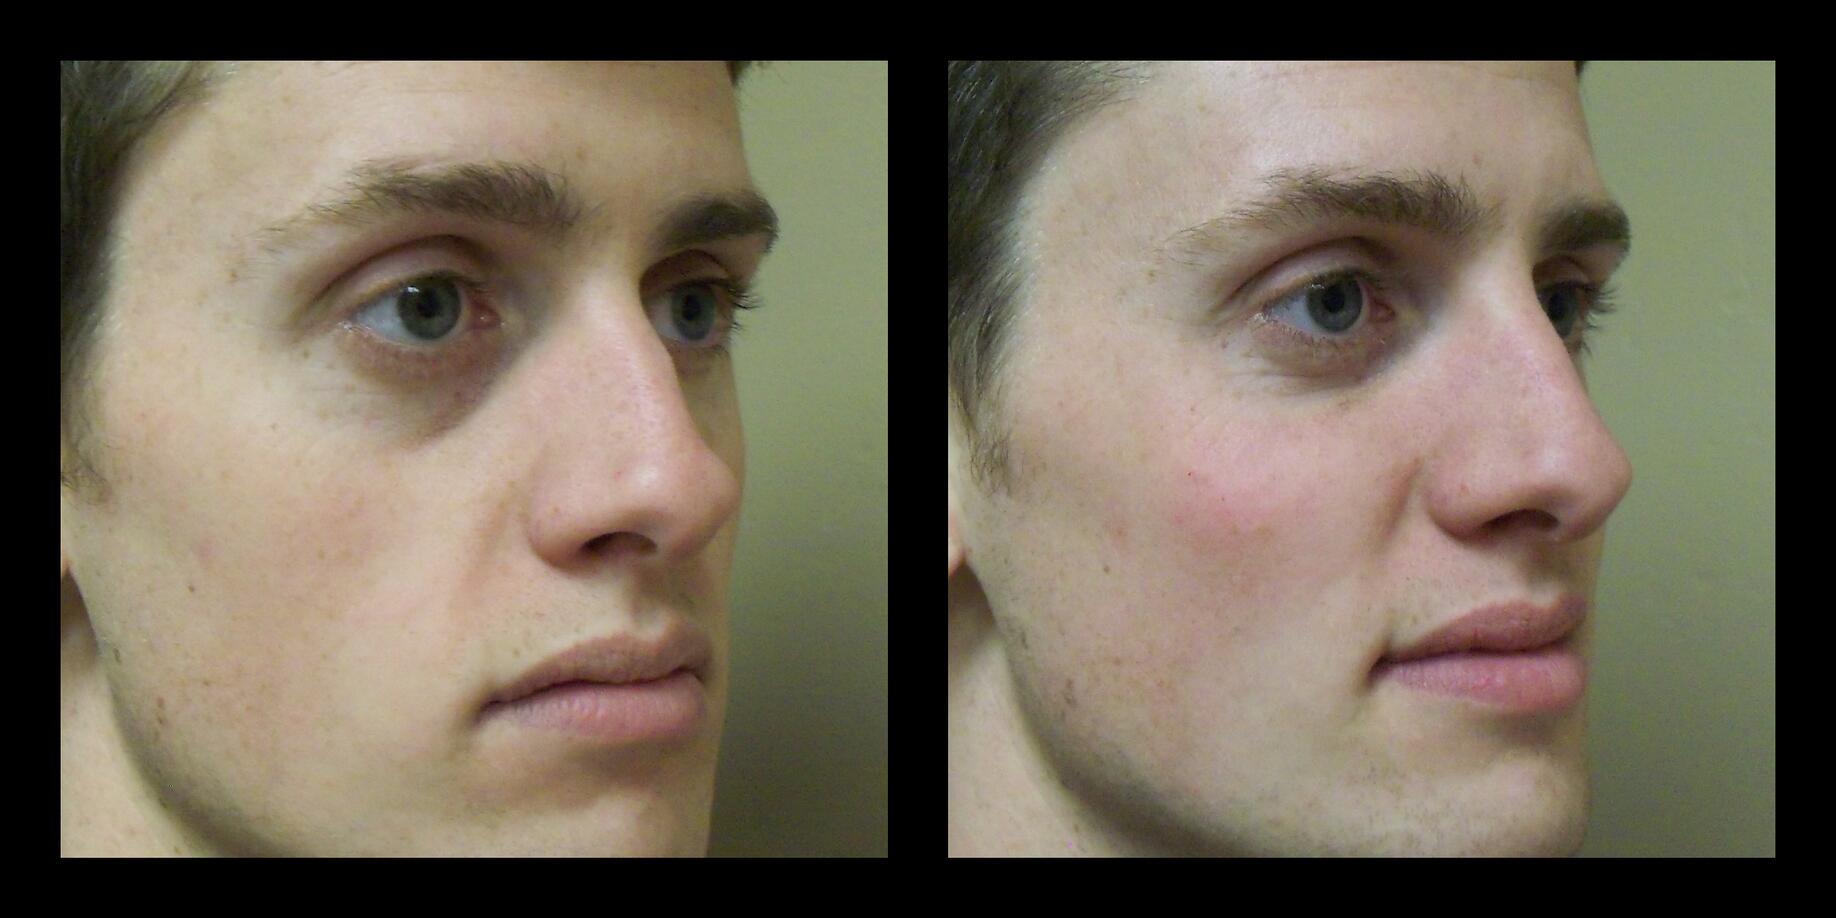 10-minute Nose Job! Non-surgical rhinoplasty!